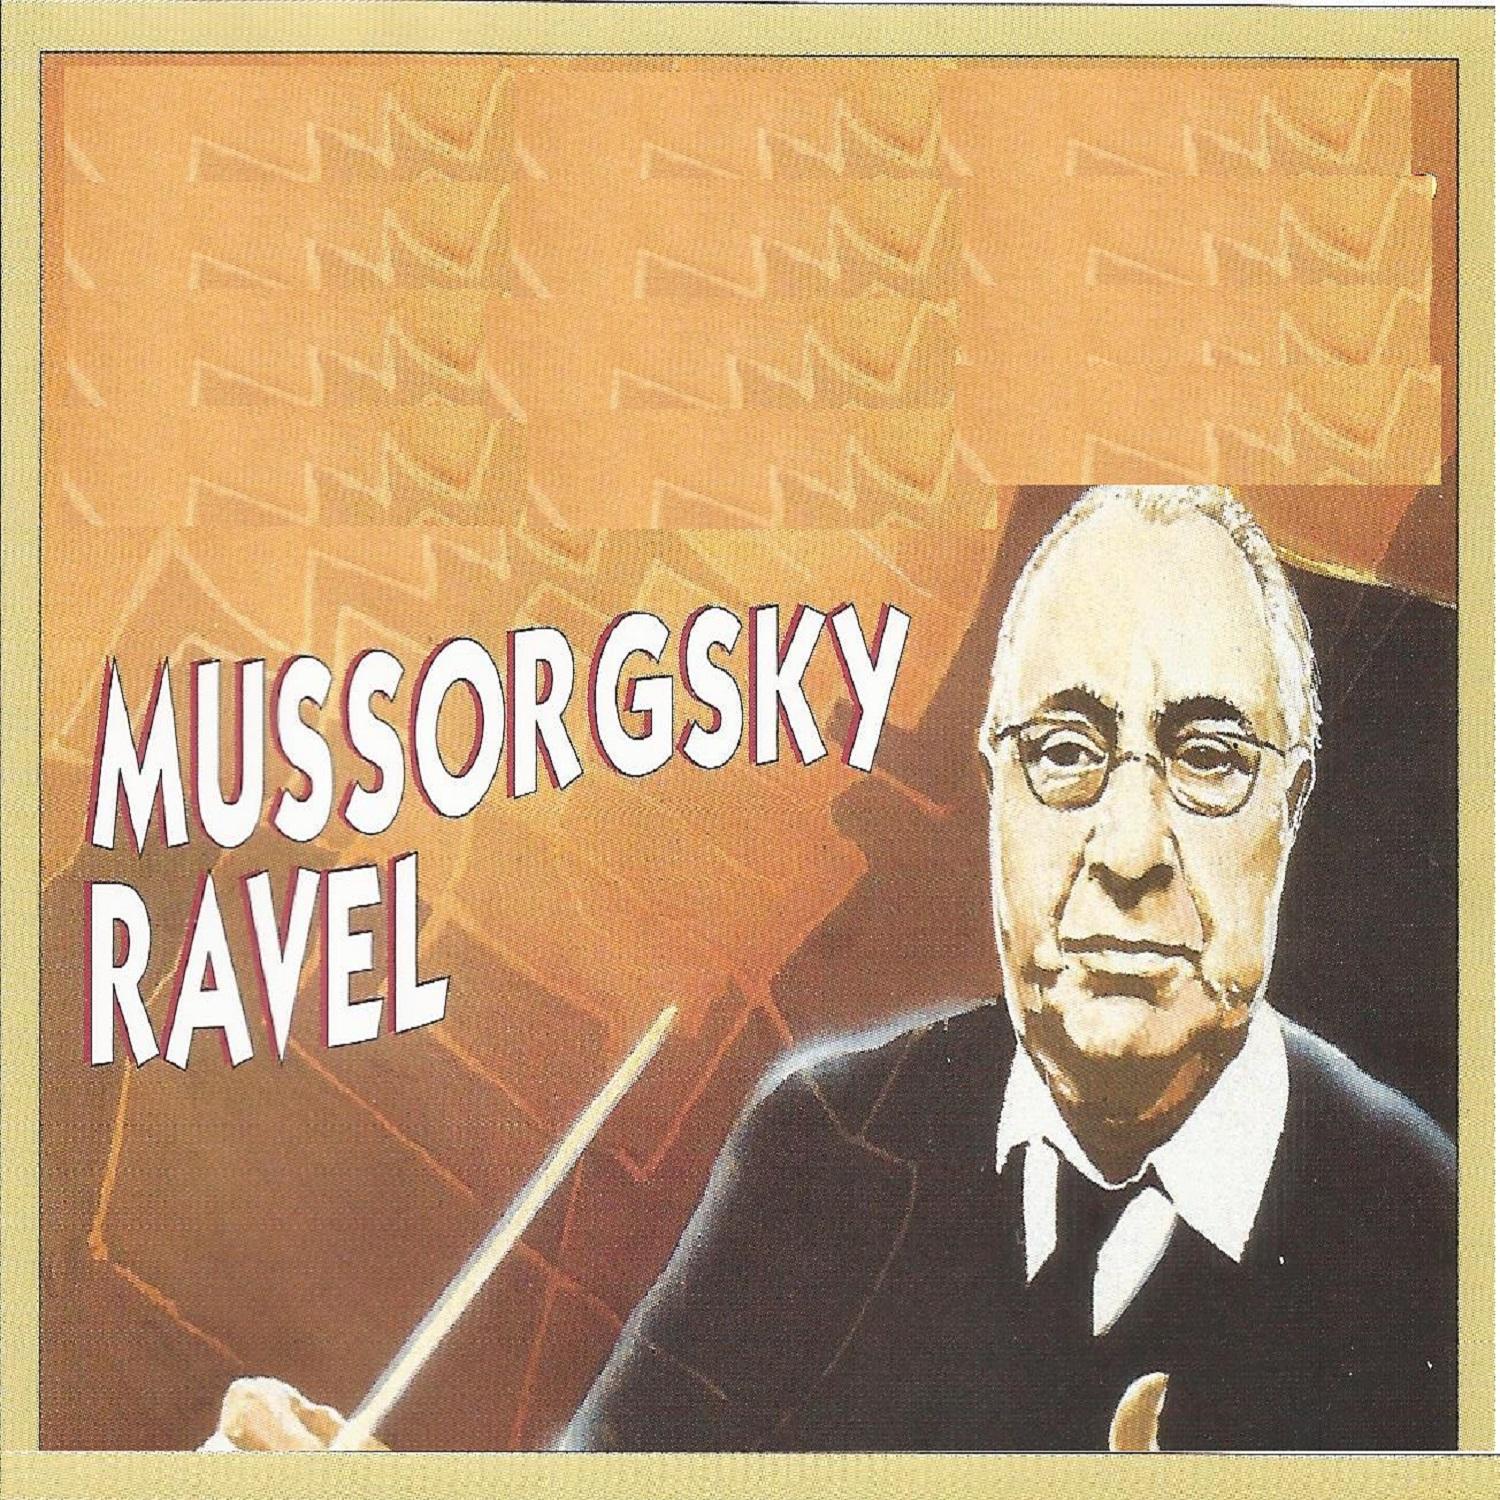 Mussorgsky / Ravel – pictures at an Exhibition old Castle